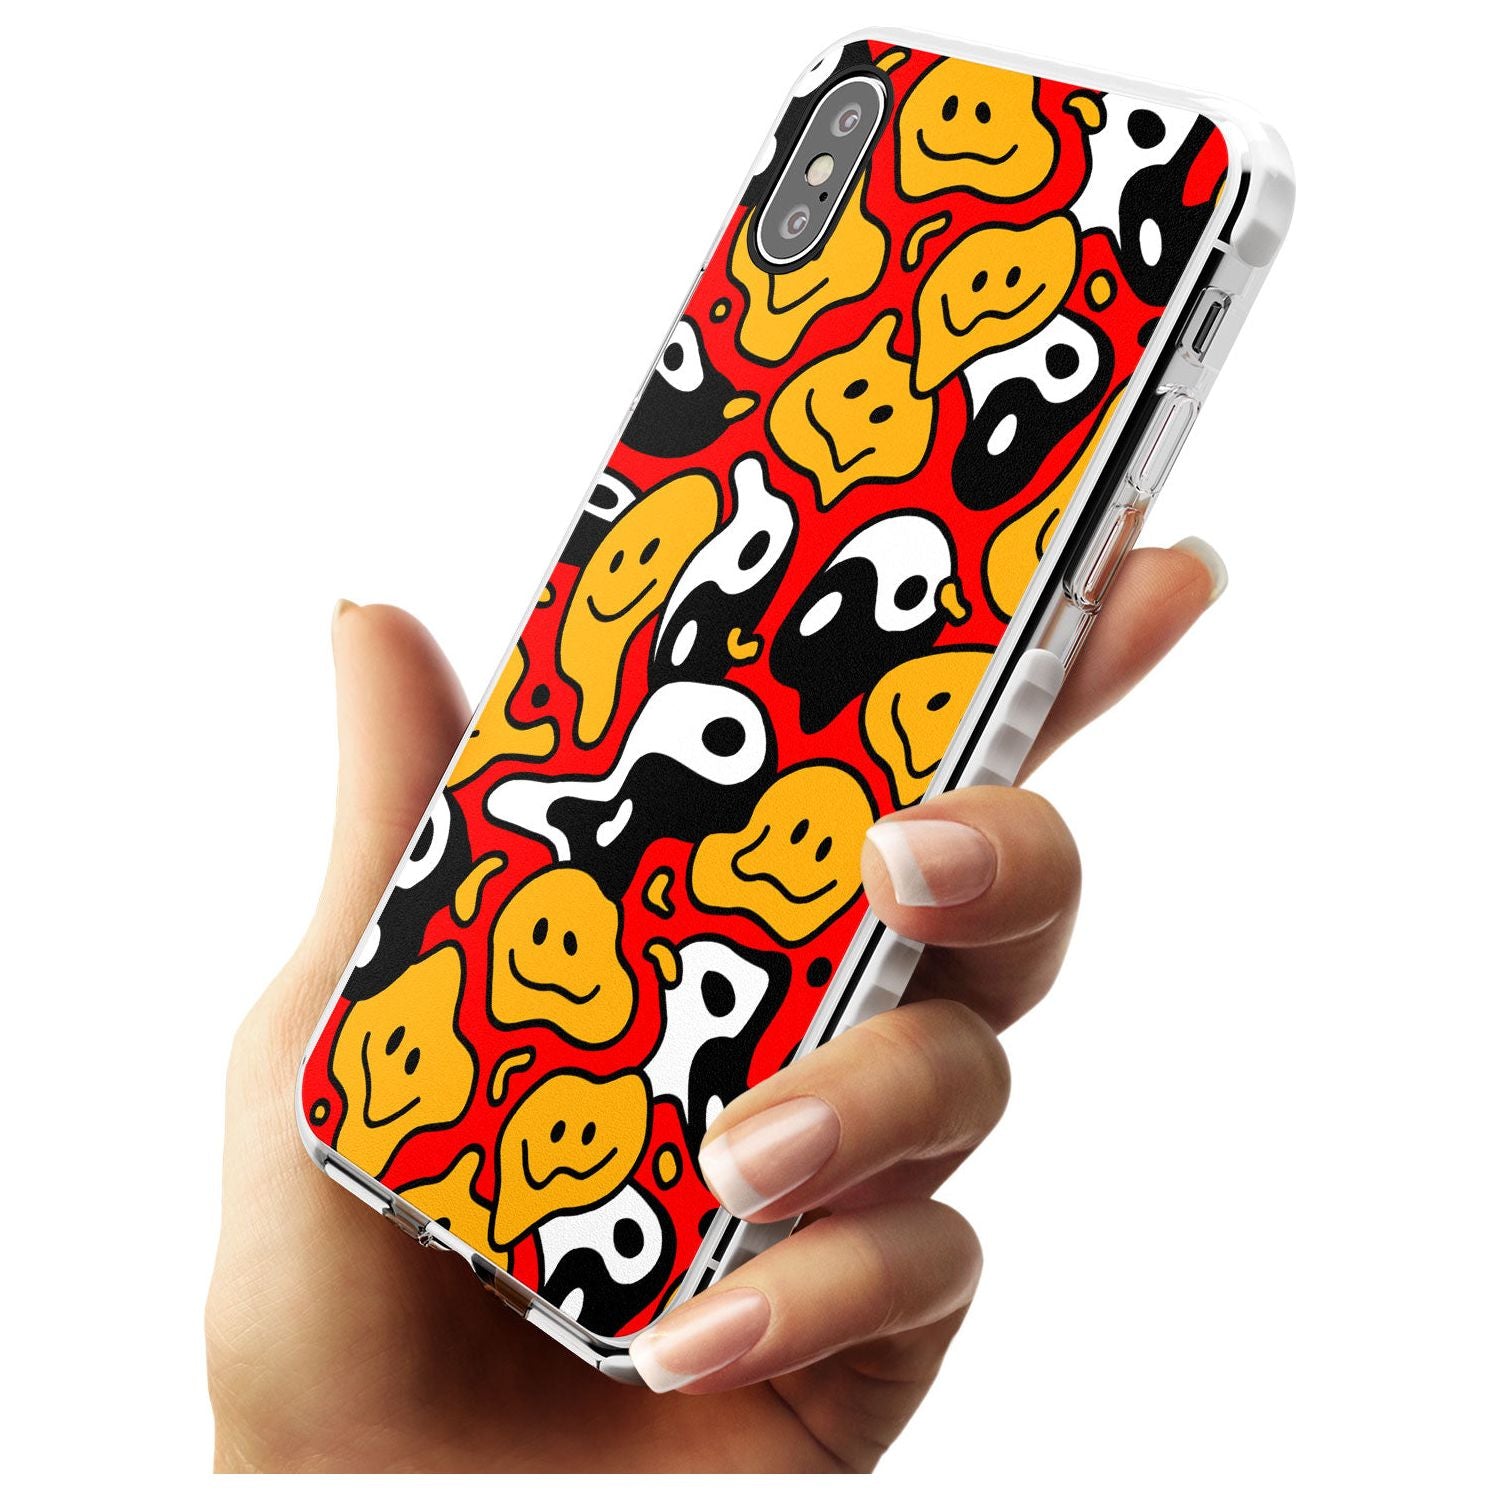 Yin Yang Acid Face Impact Phone Case for iPhone X XS Max XR